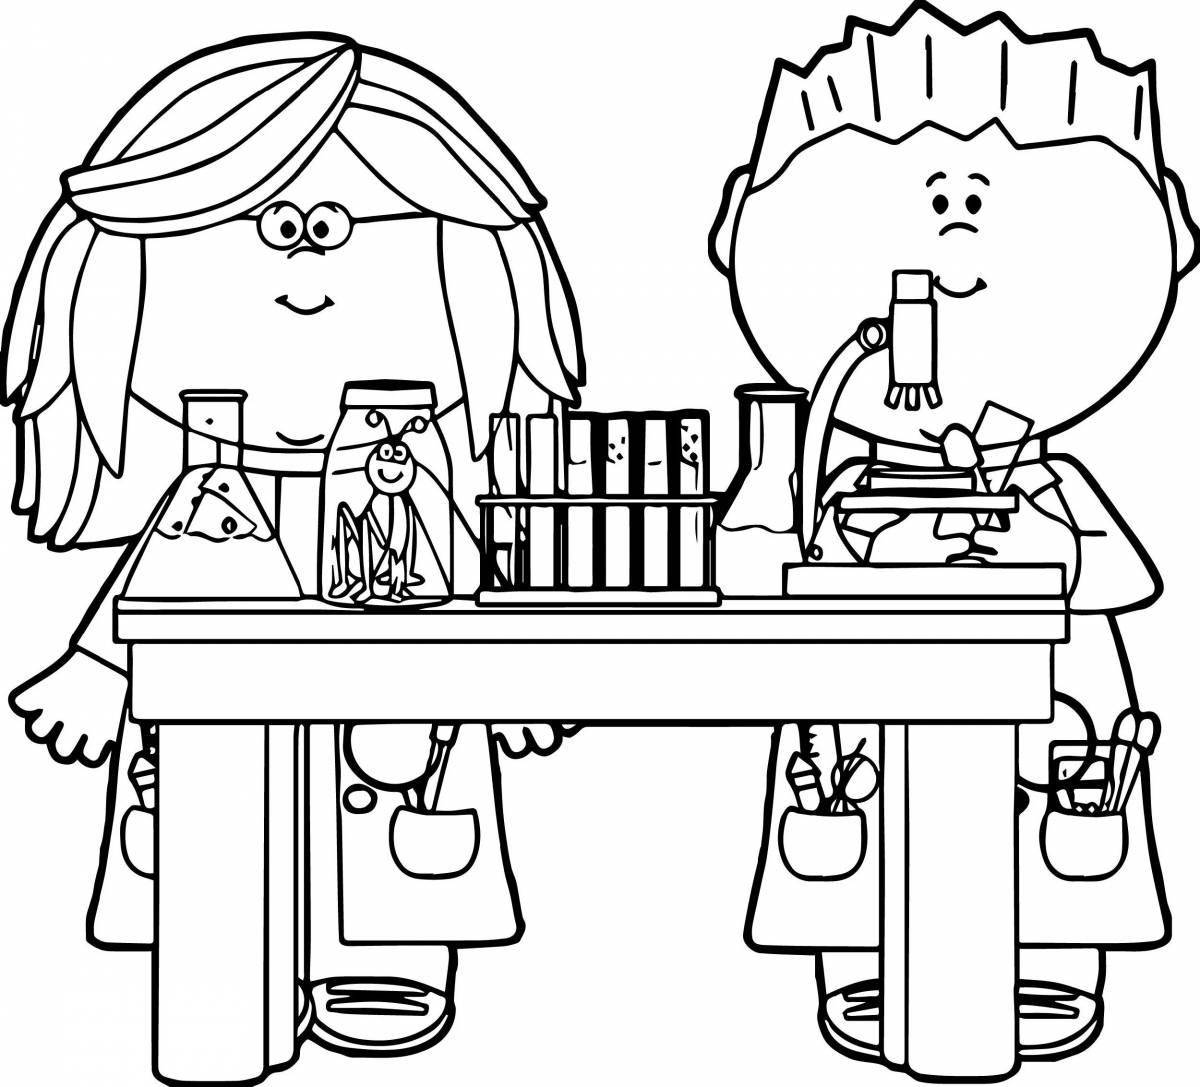 Exciting science and technology coloring book